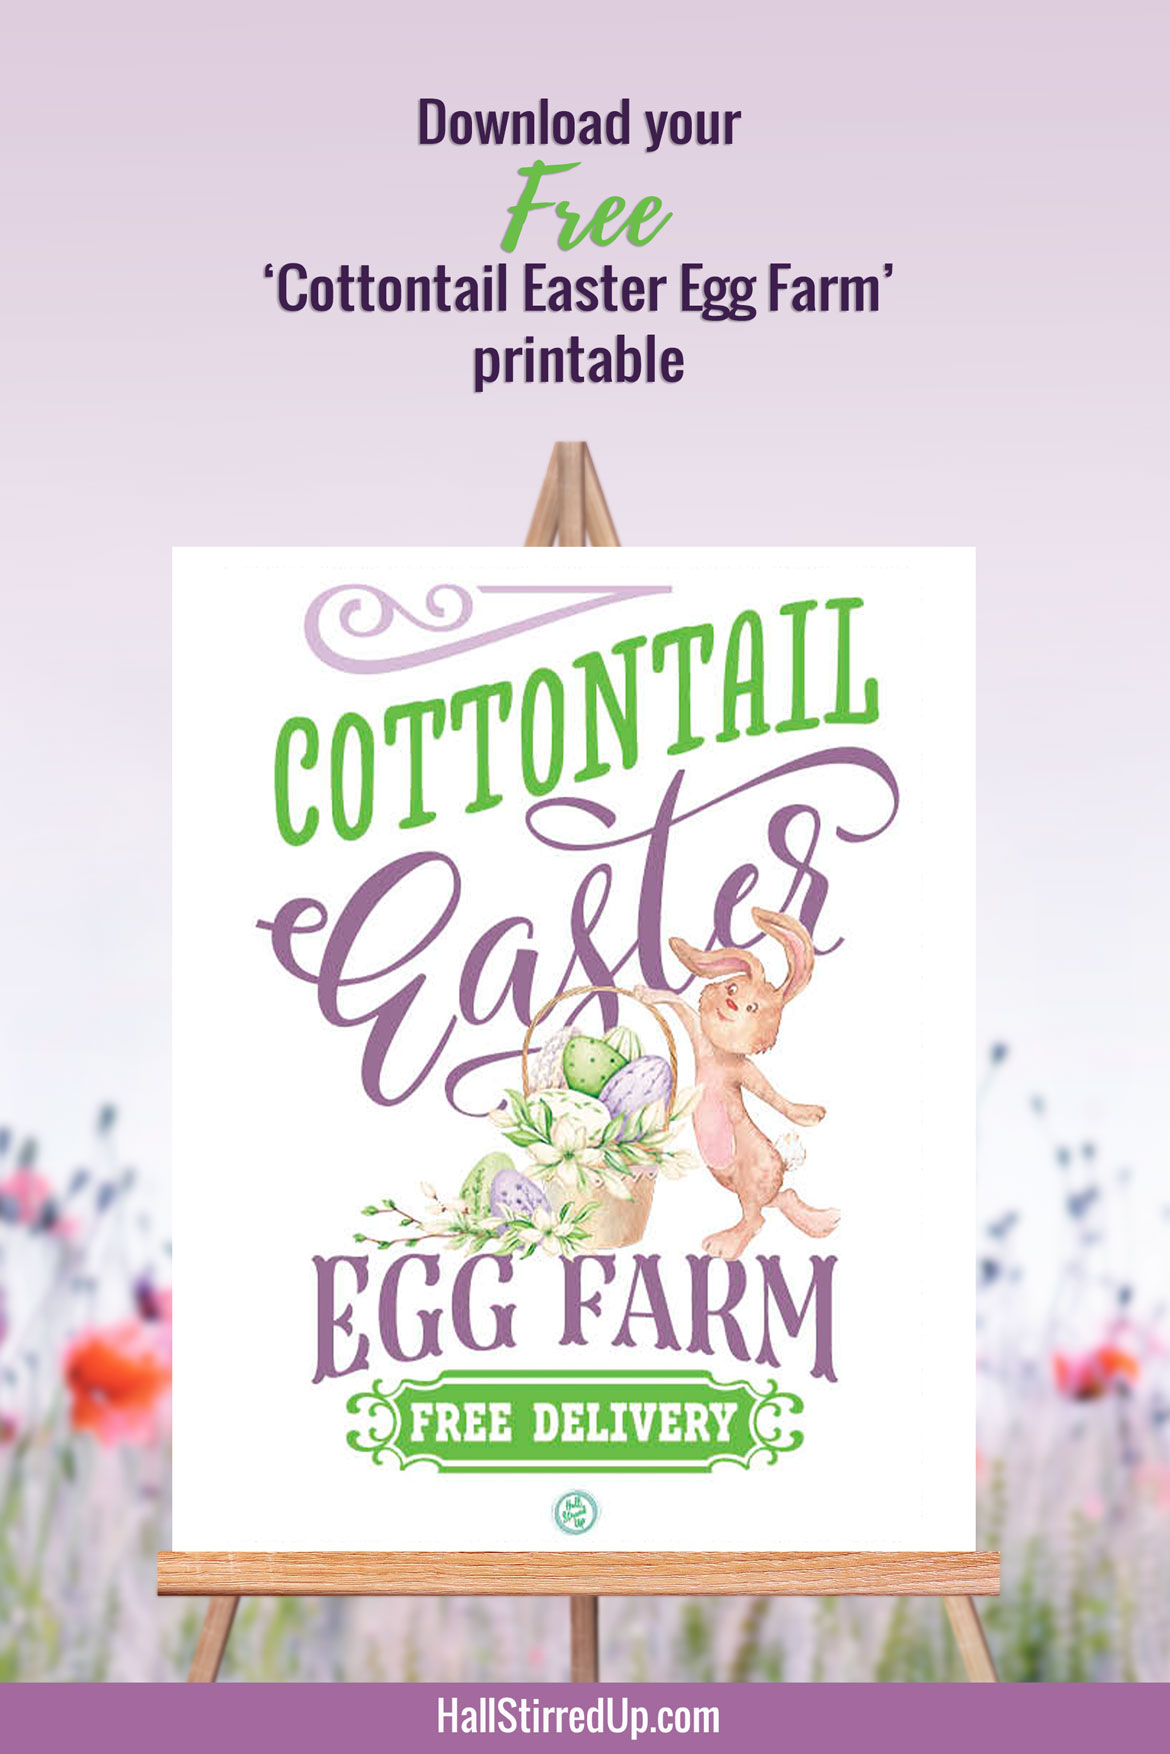 Celebrate with a 'Cottontail Easter Egg Farm' printable sign